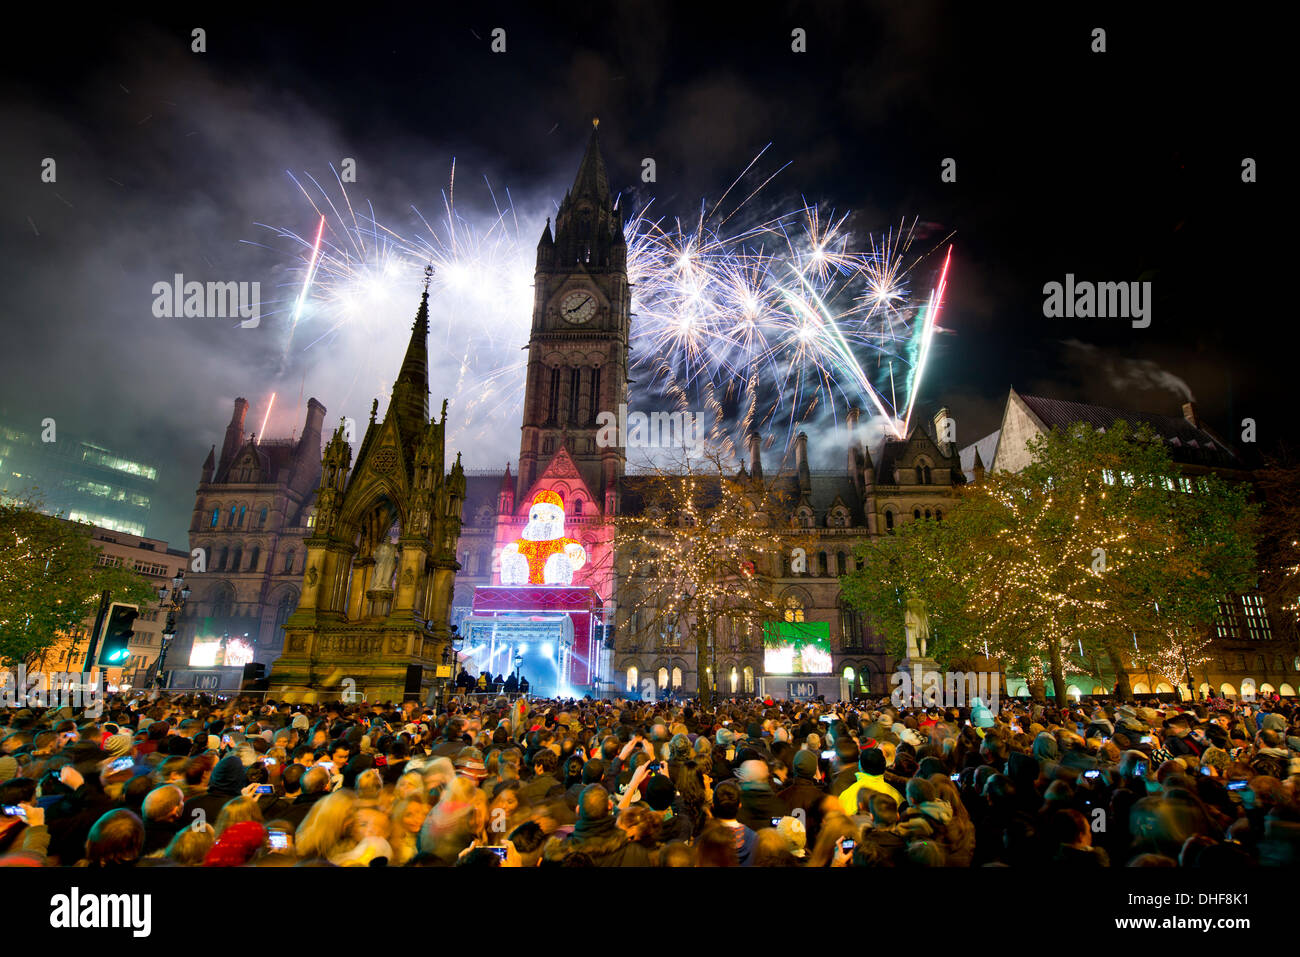 Manchester, UK. 8th November 2013. Revellers flock to Manchester's Albert Square to watch the city's annual Christmas lights switch on in front of the Town Hall. The lights were switched on by ninth X Factor winner James Arthur, who won the talent competition in 2012, along with The Vamps. Credit:  Russell Hart/Alamy Live News. Stock Photo